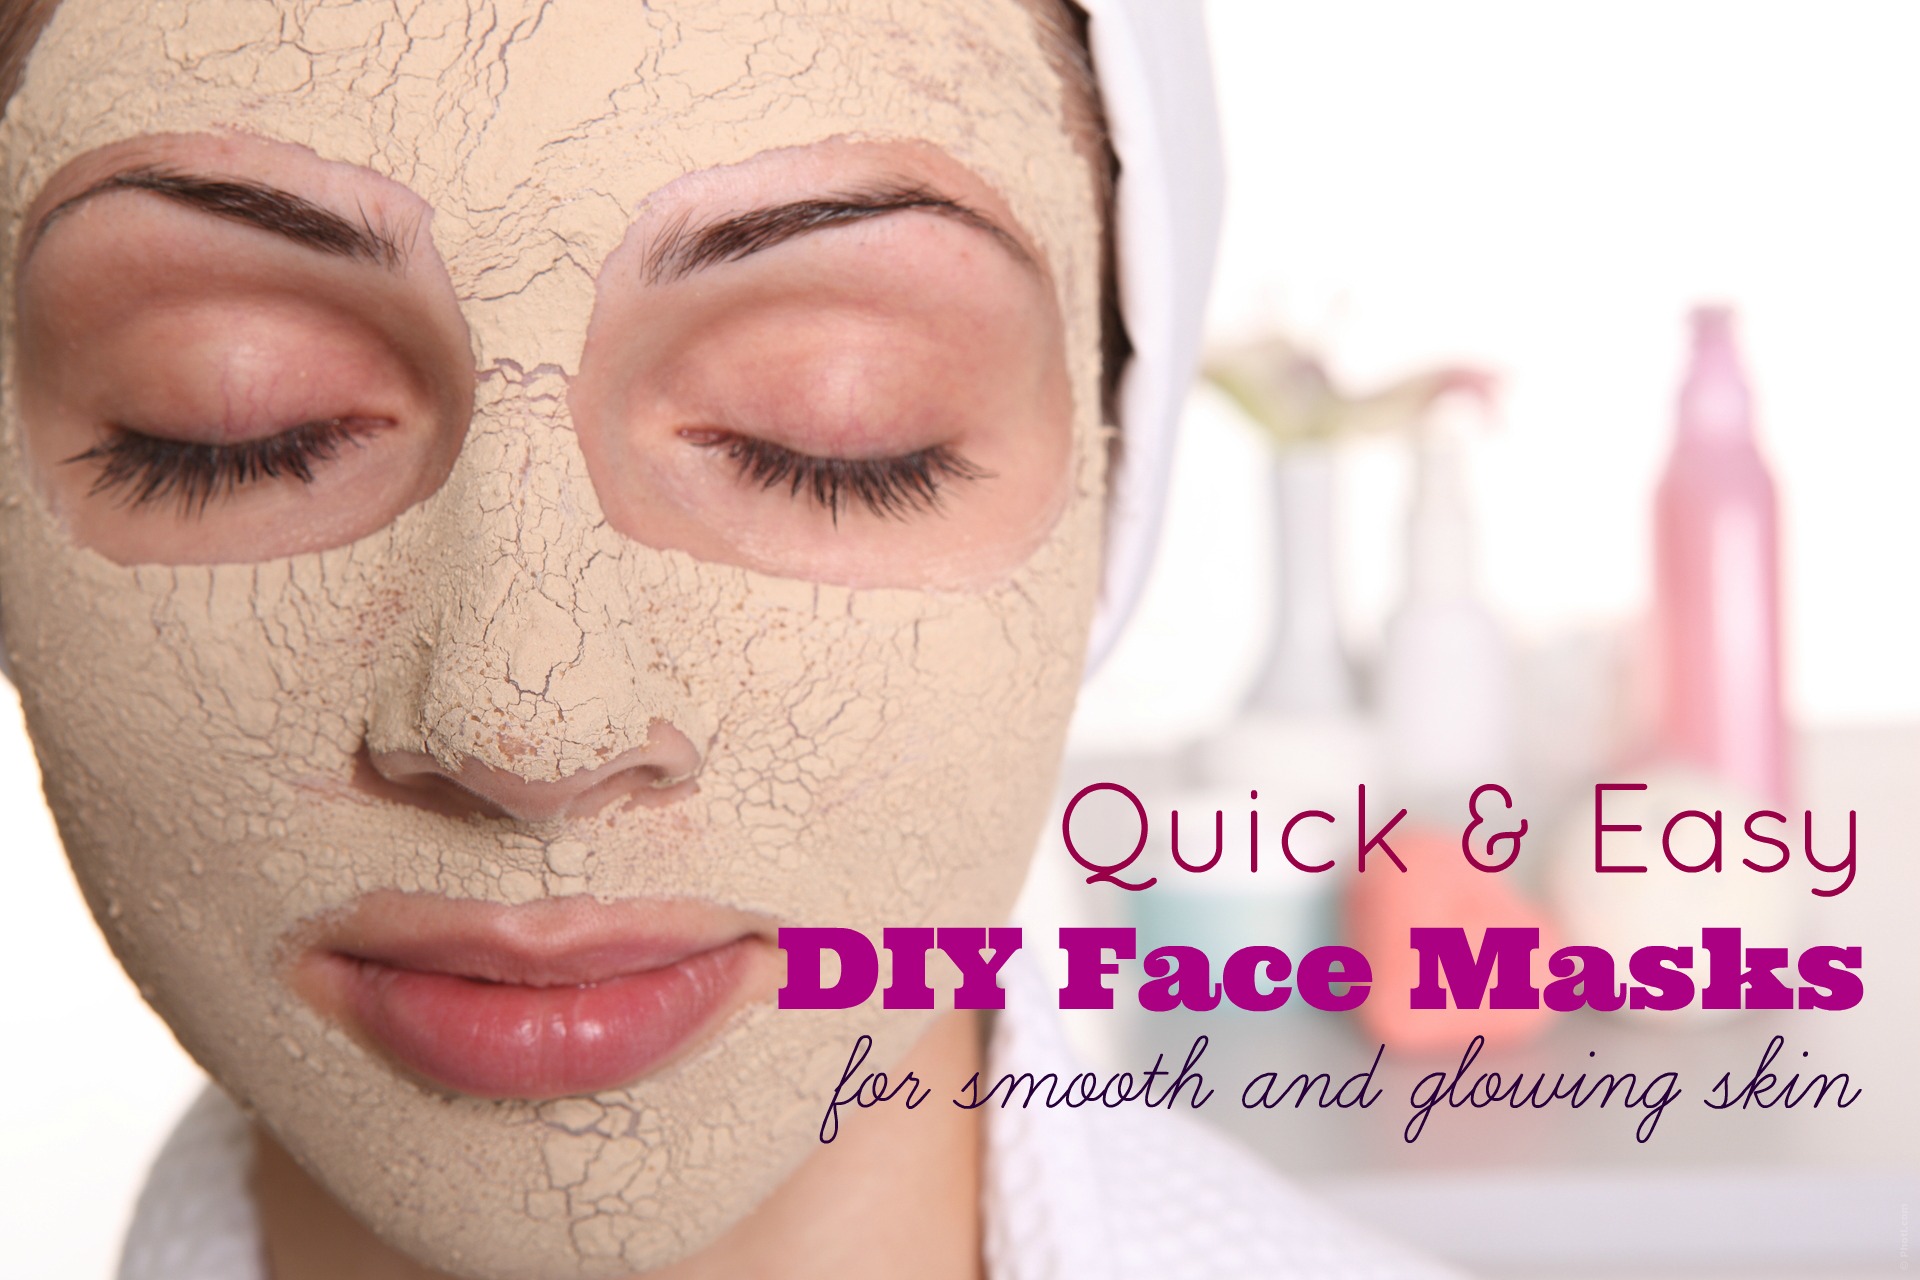 Quick and easy DIY smoothing face masks!